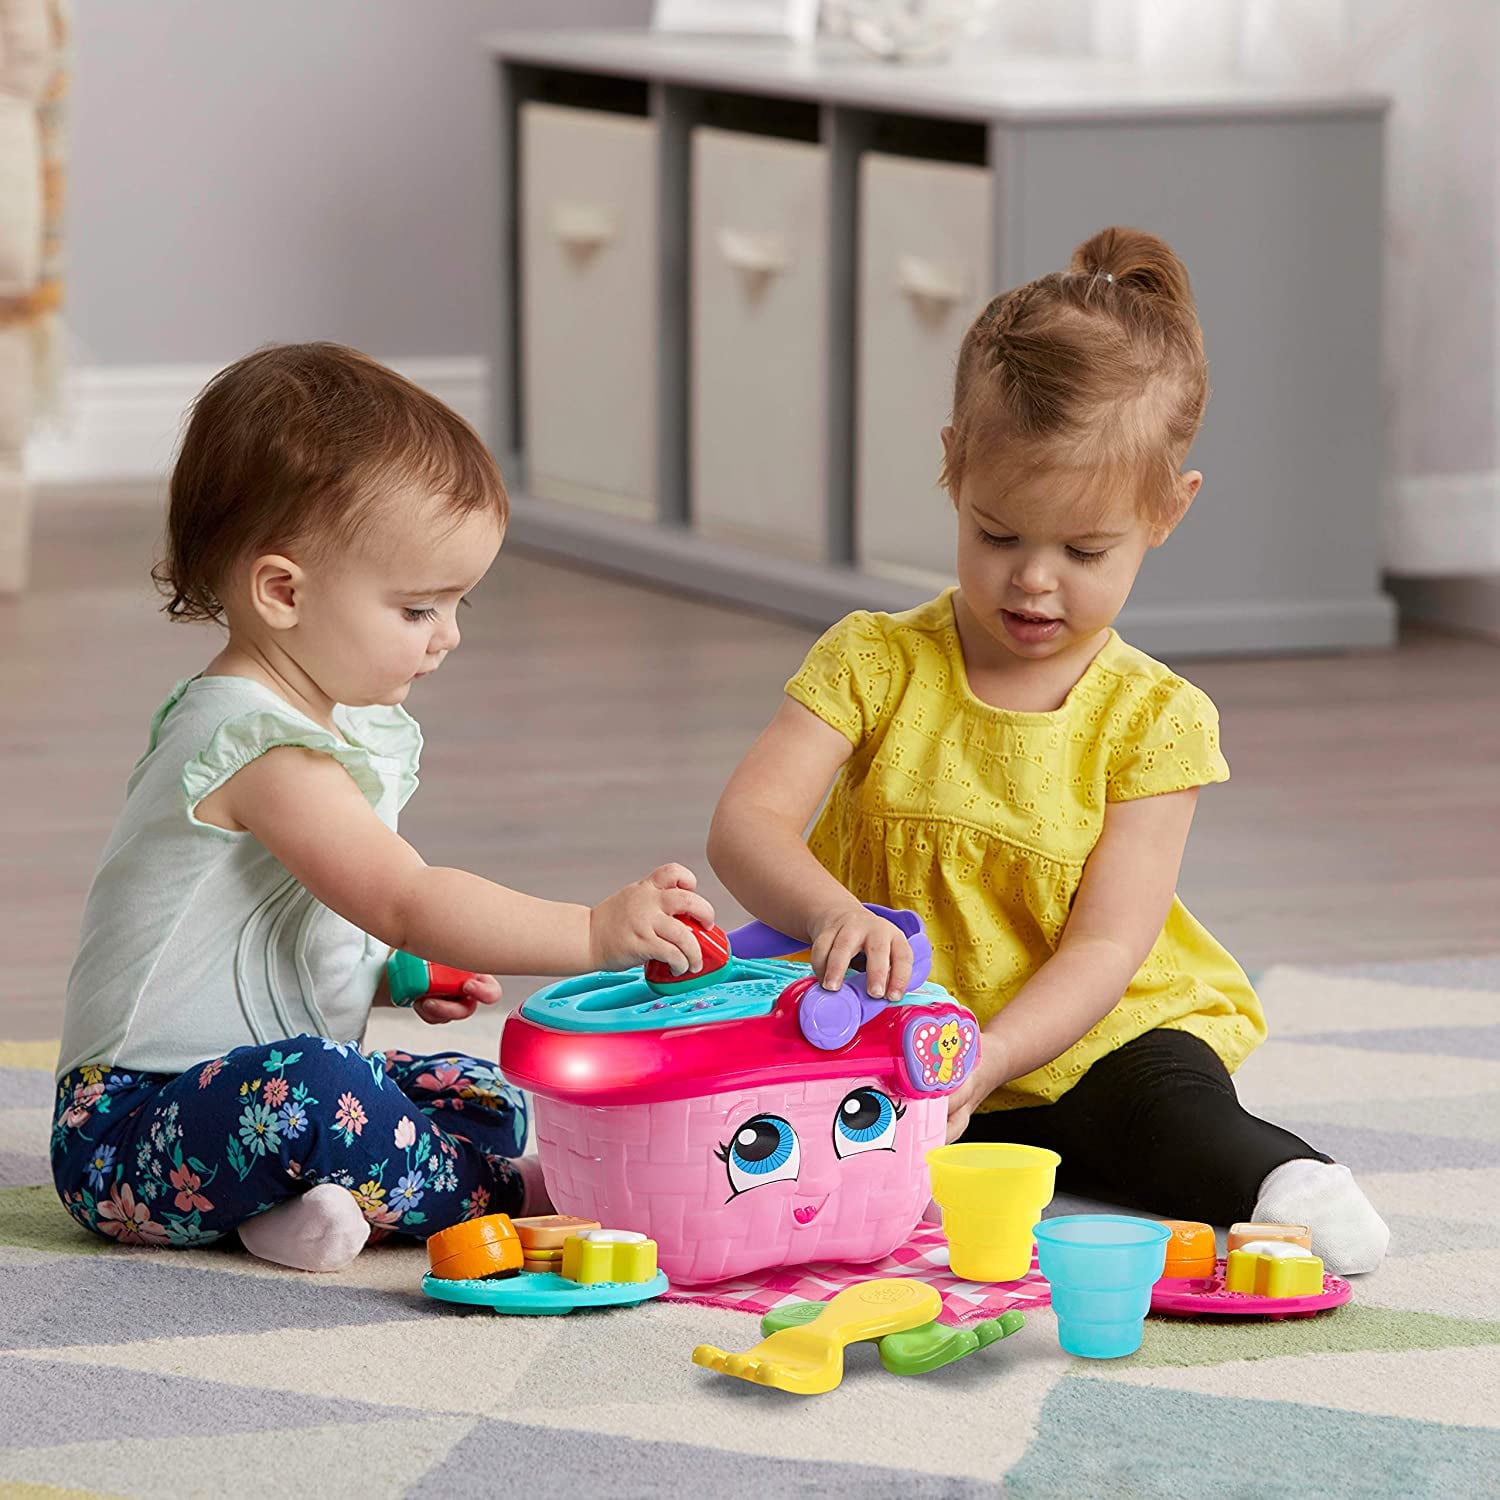 16 of the Best Toys and Gift Ideas For a 1-Year-Old in 2023